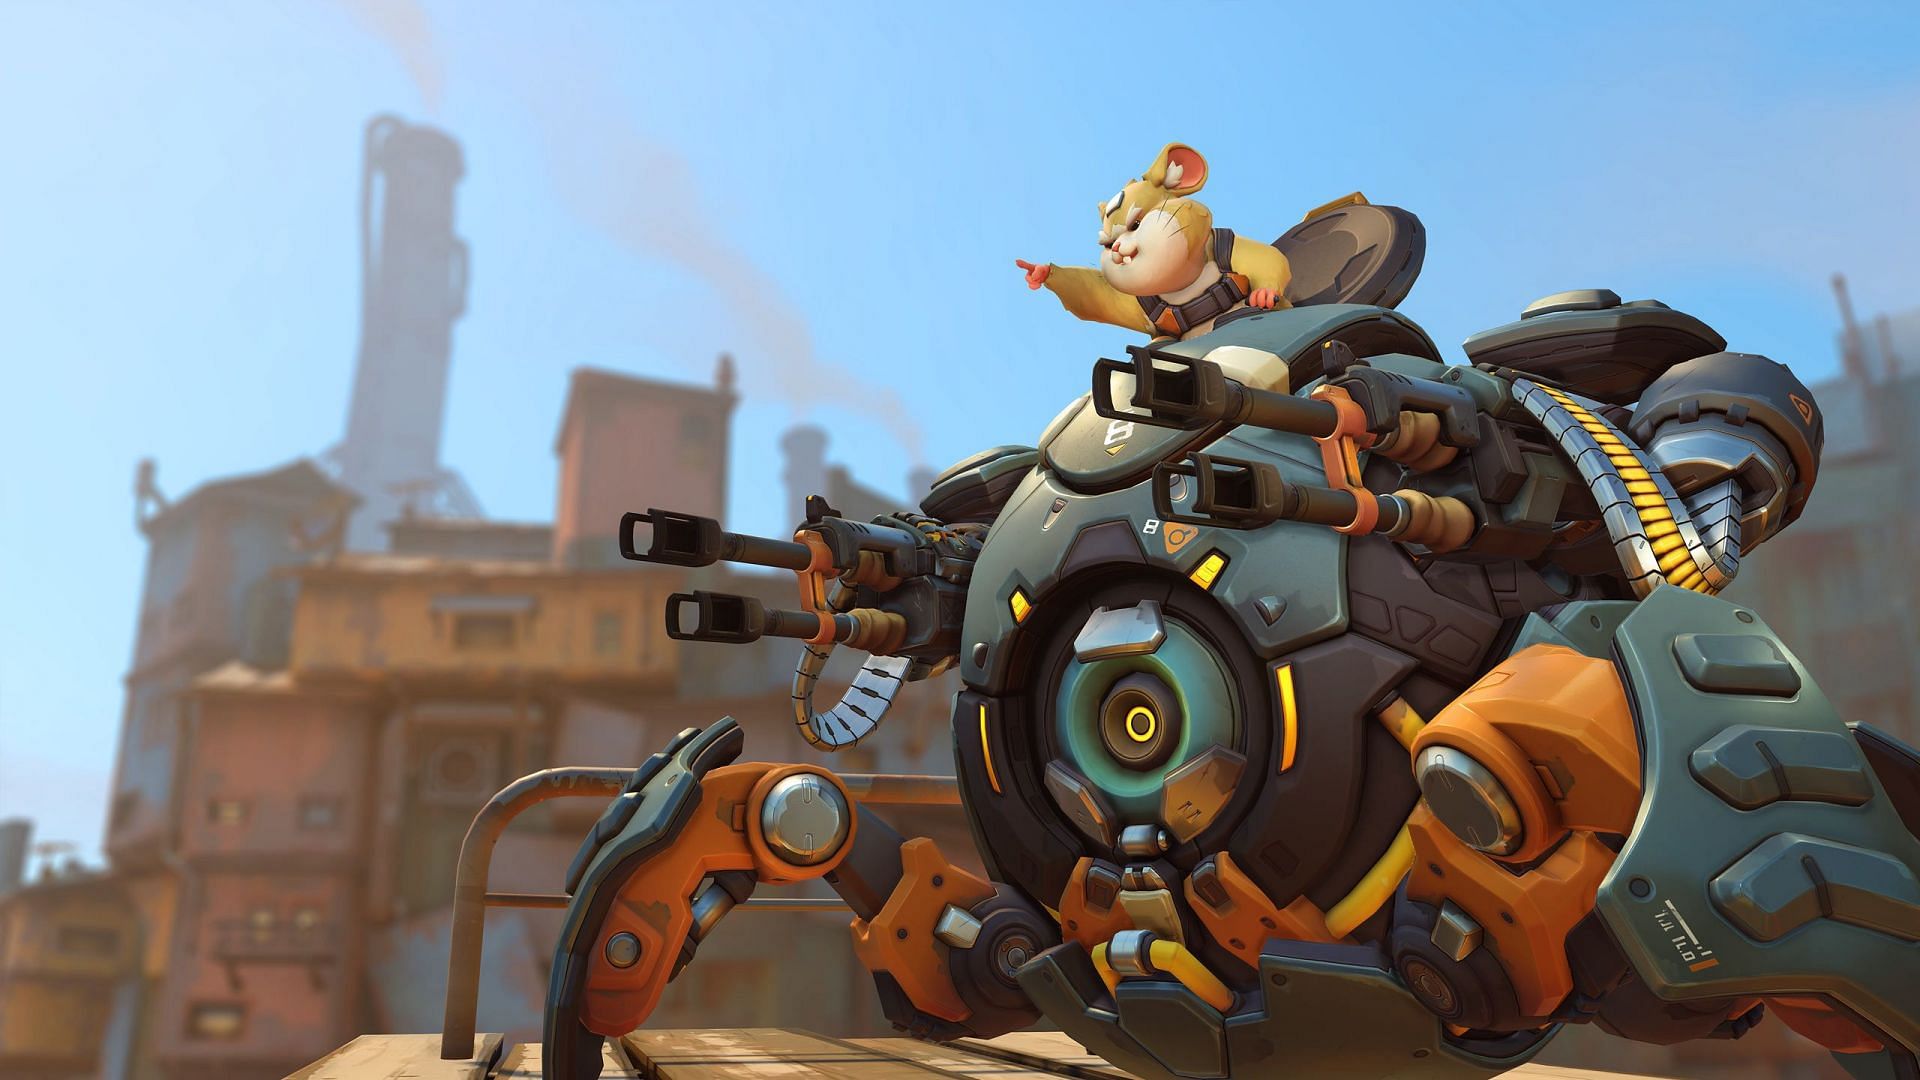 Wrecking Ball in Overwatch (Image via Blizzard)